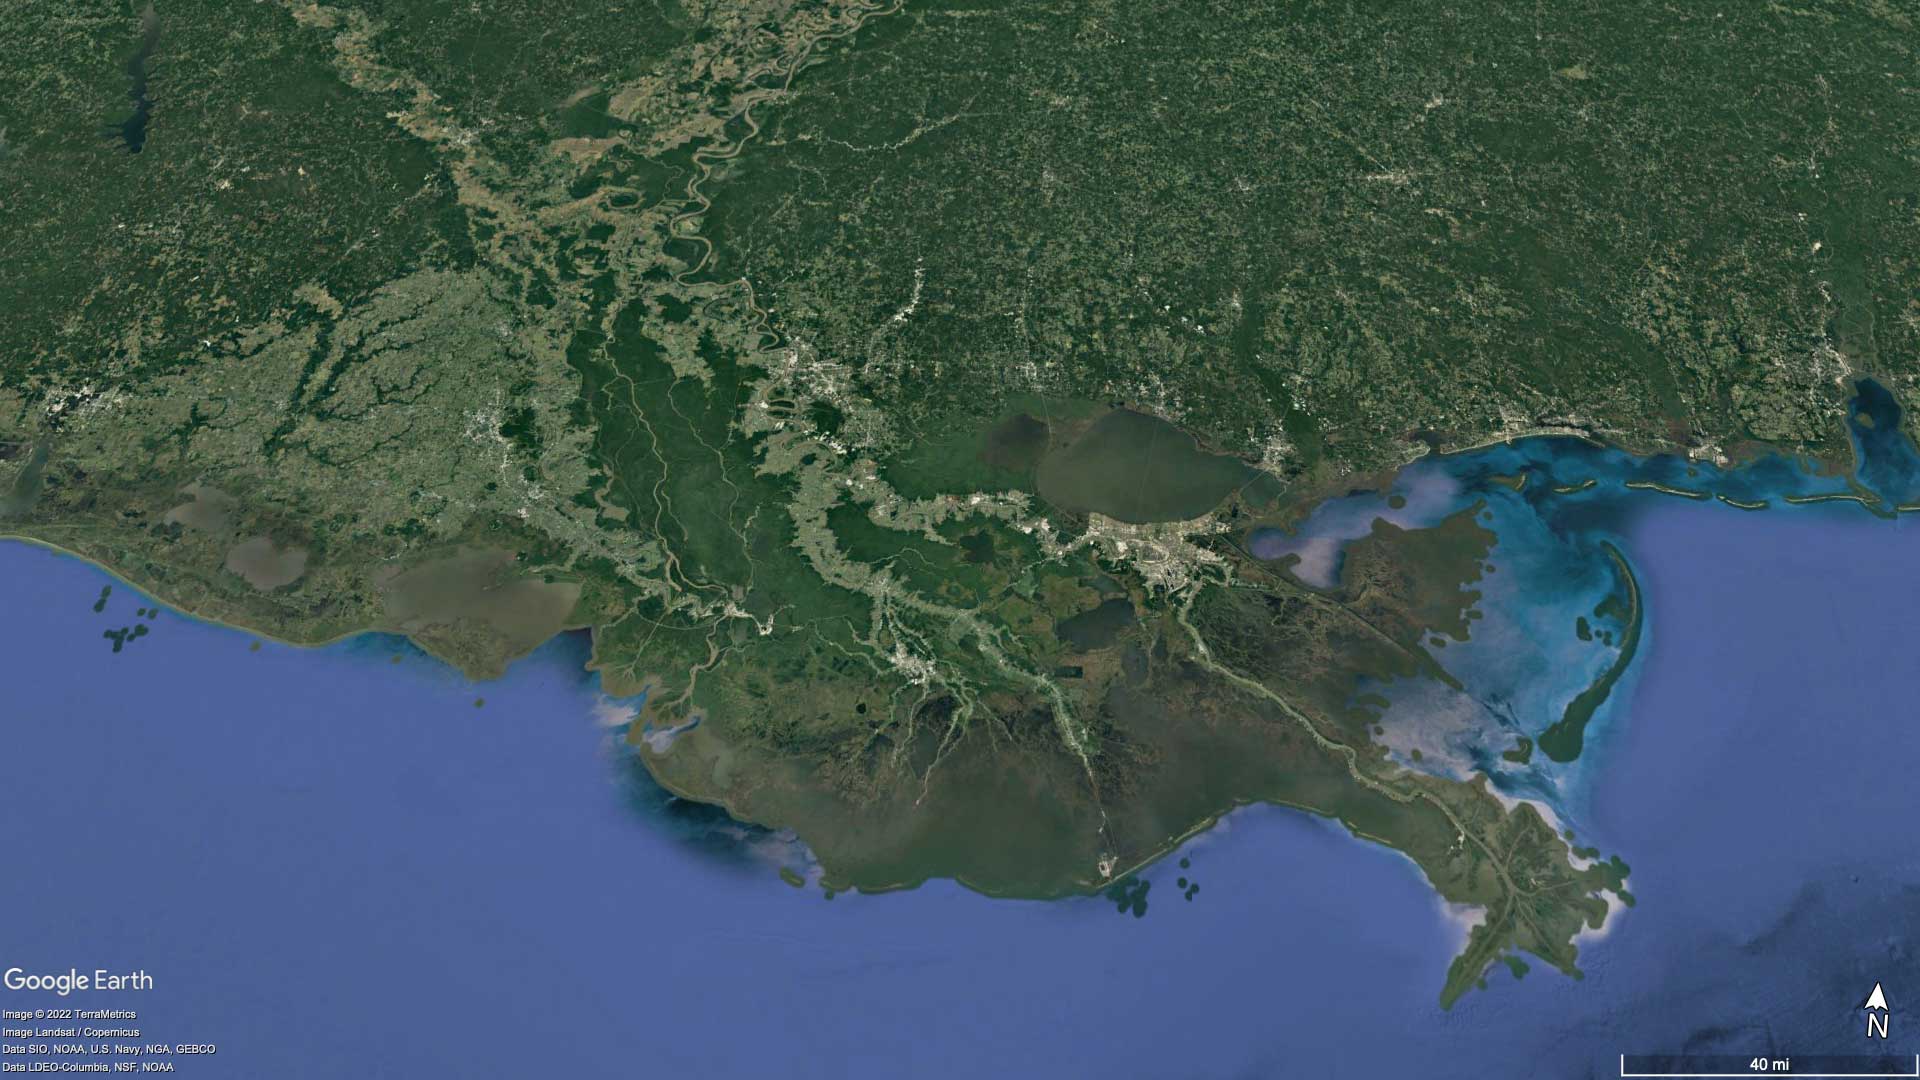 Interactive map of Louisiana's geology and water resources